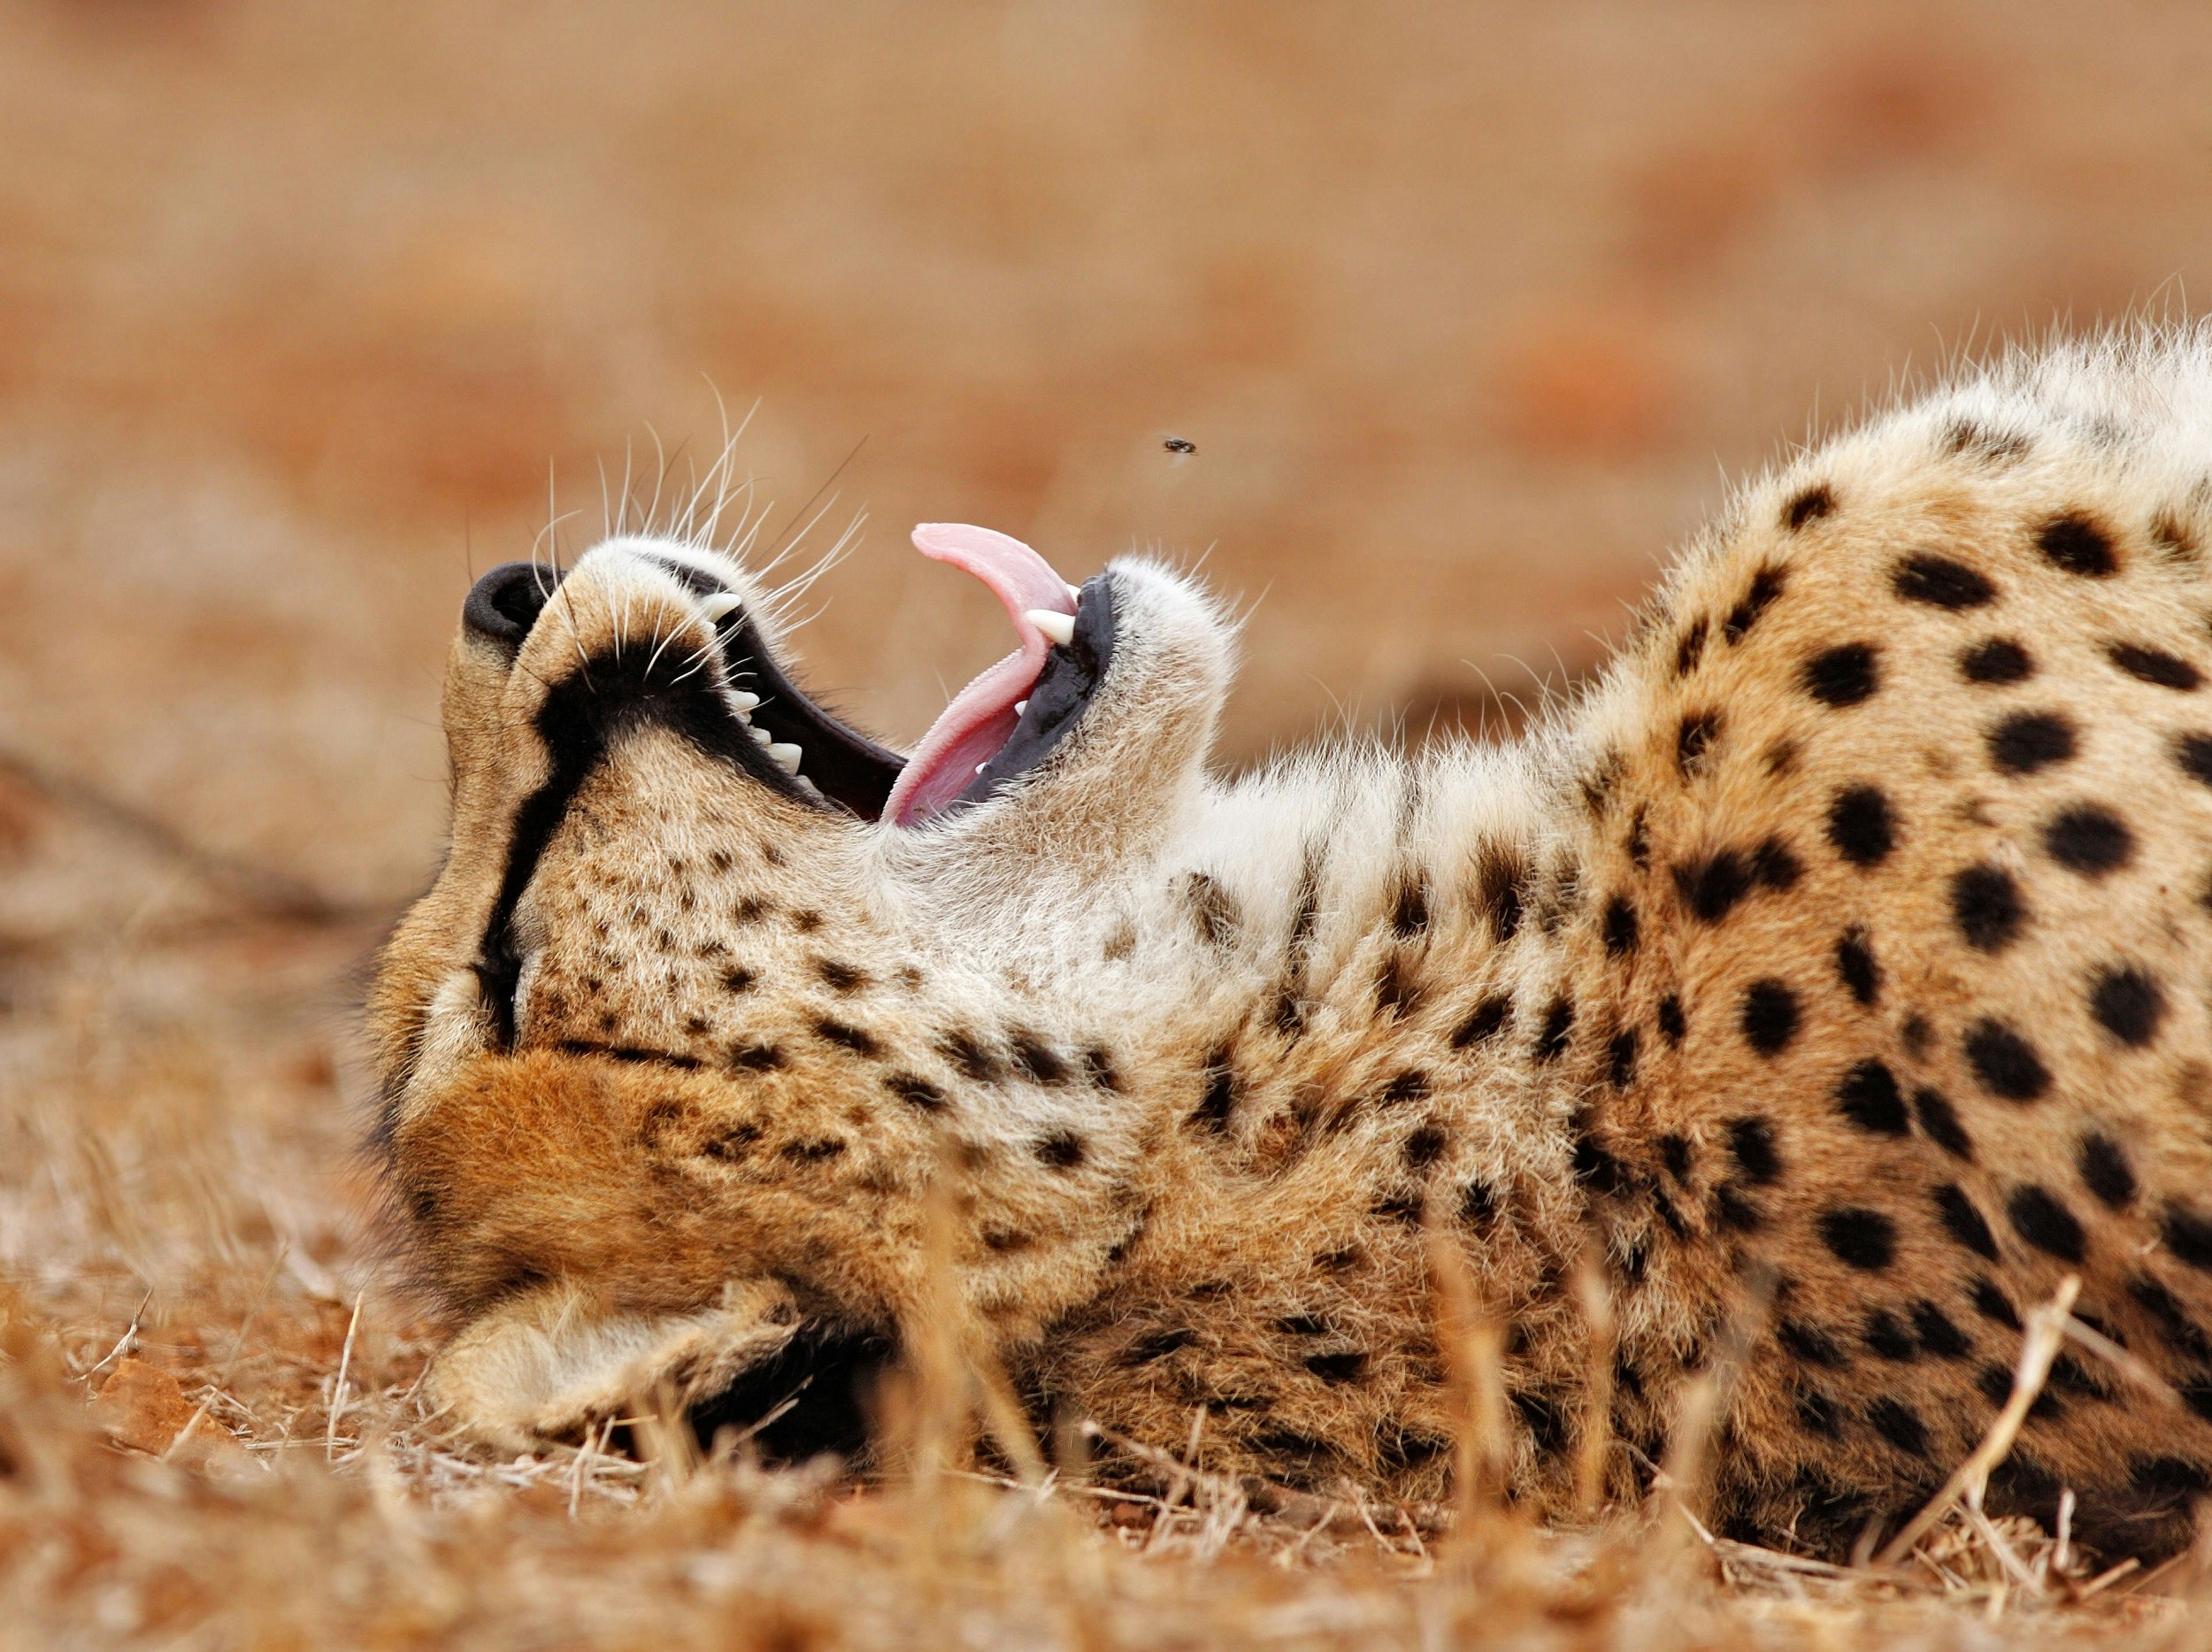 Cheetah lying on back with fly flying above mouth in Kruger National Park.